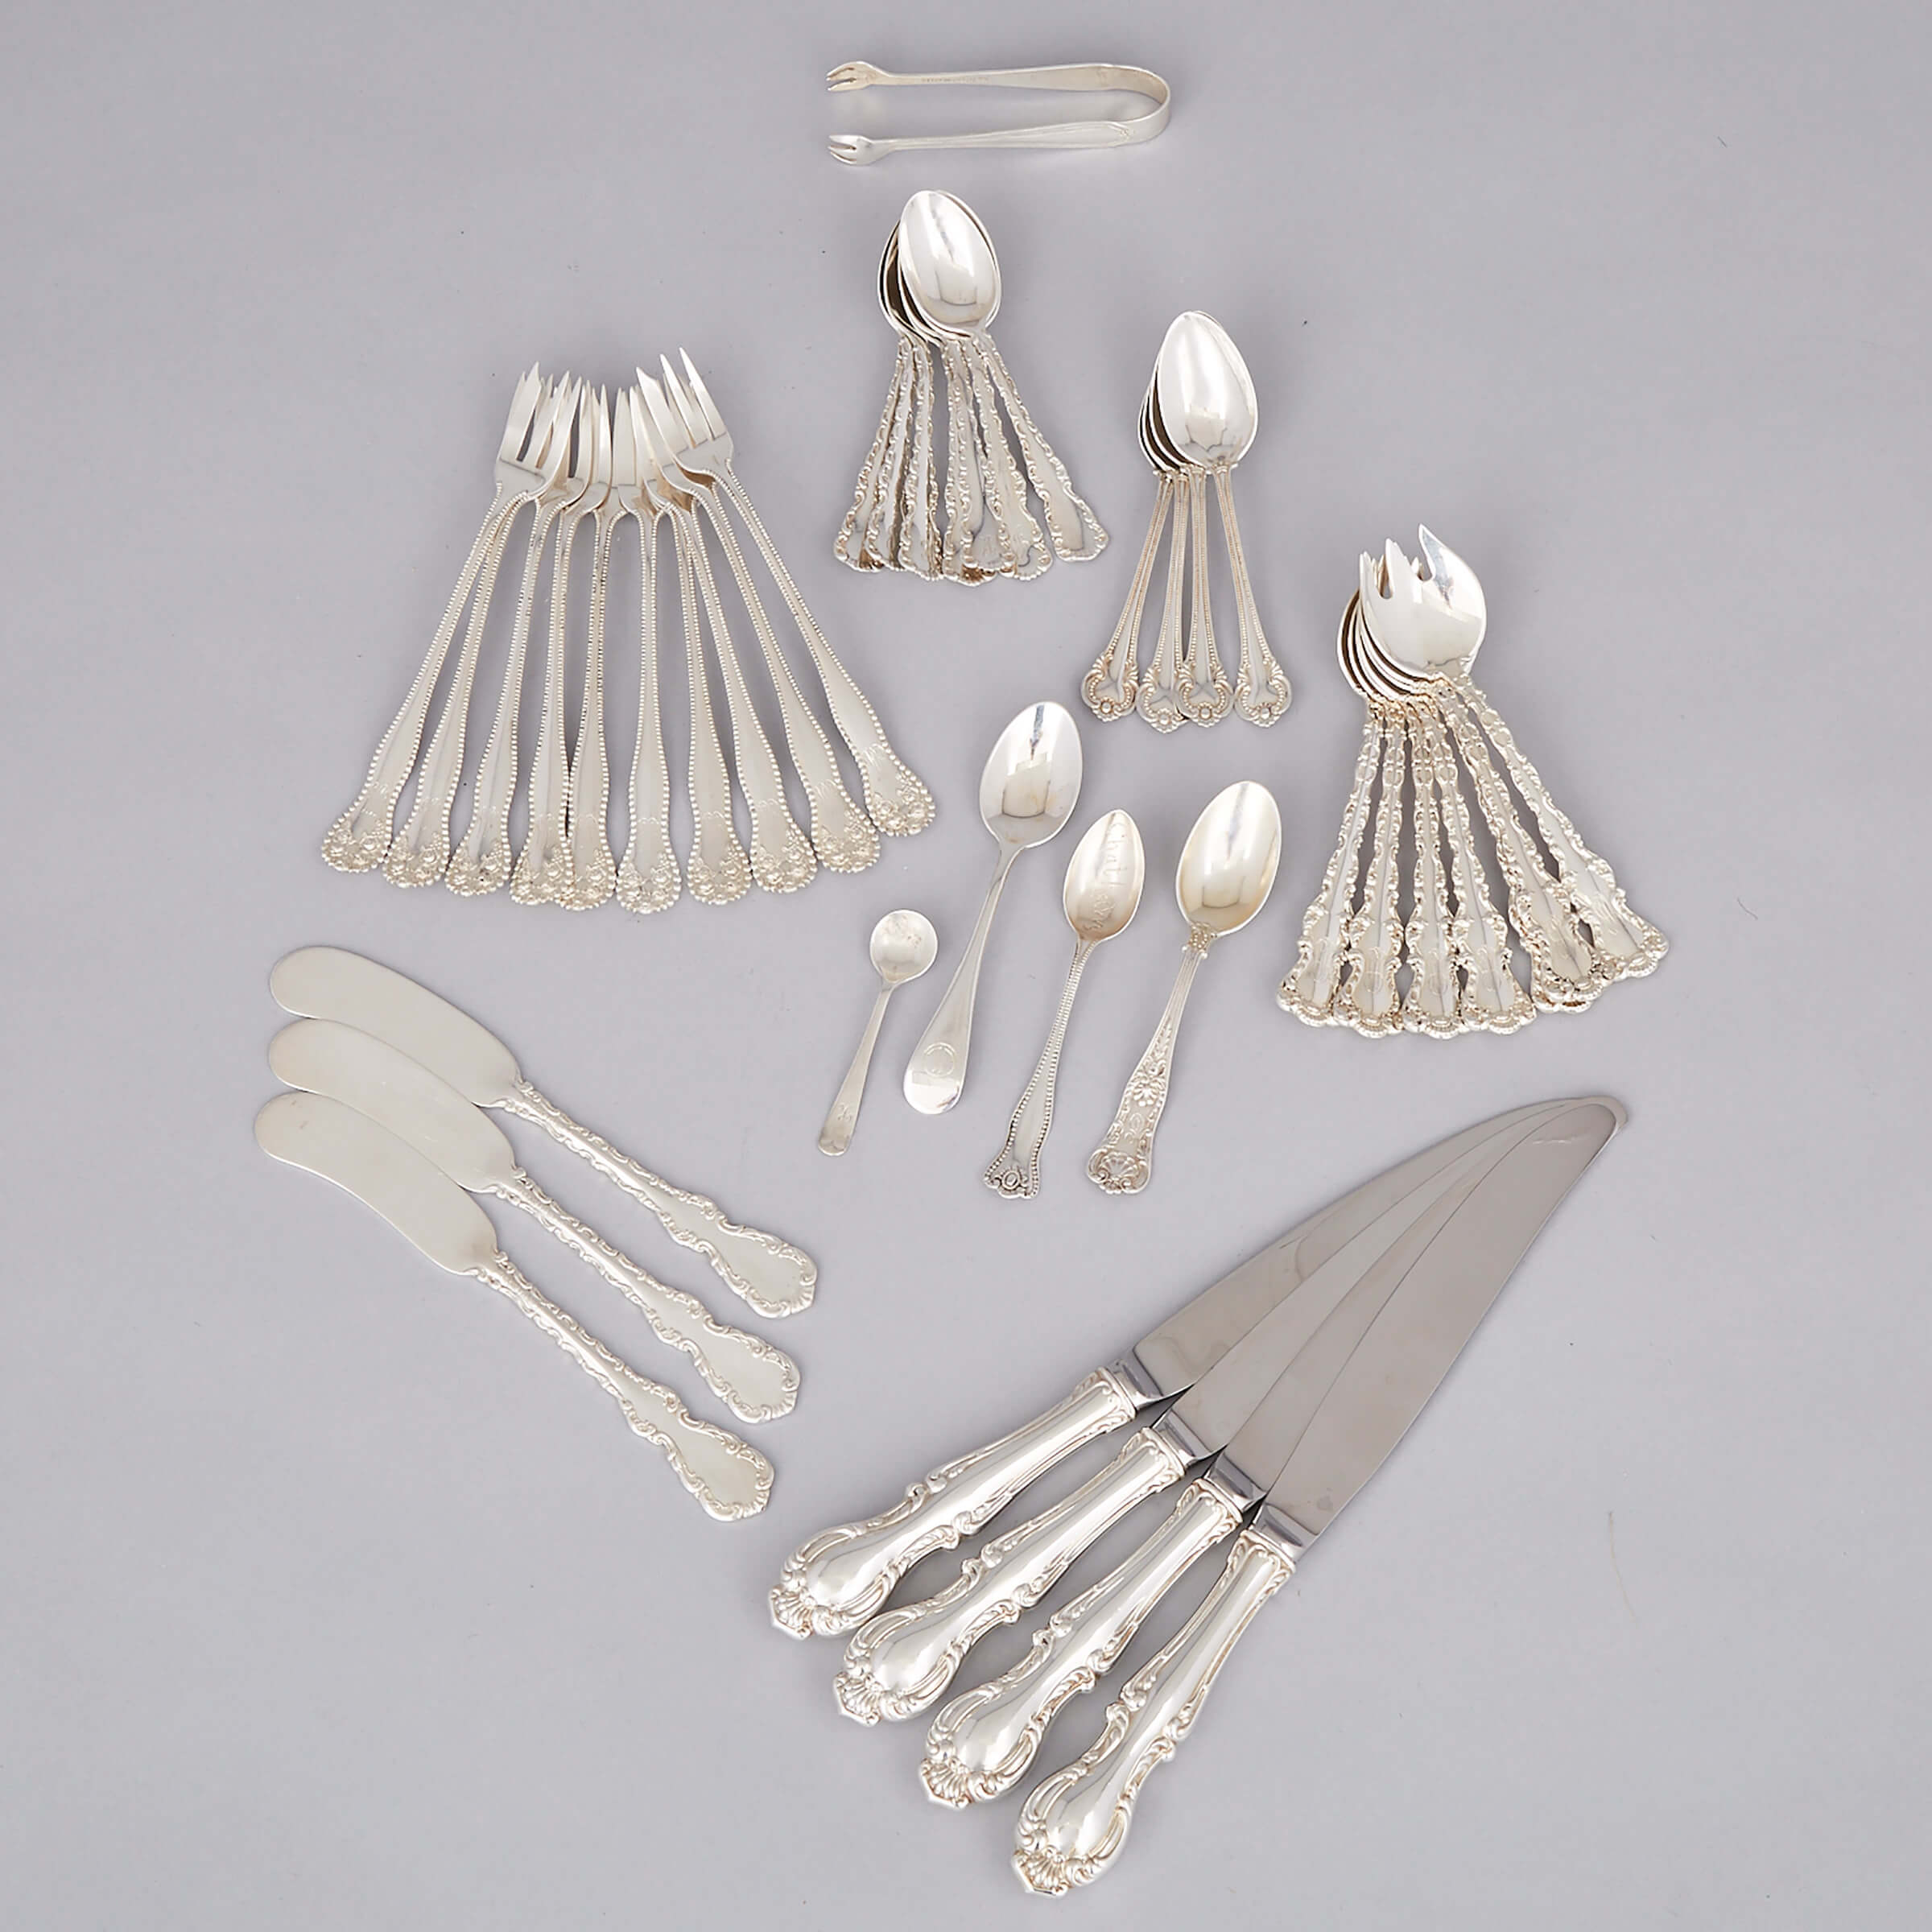 Group of Mainly North American Silver Flatware, 20th century